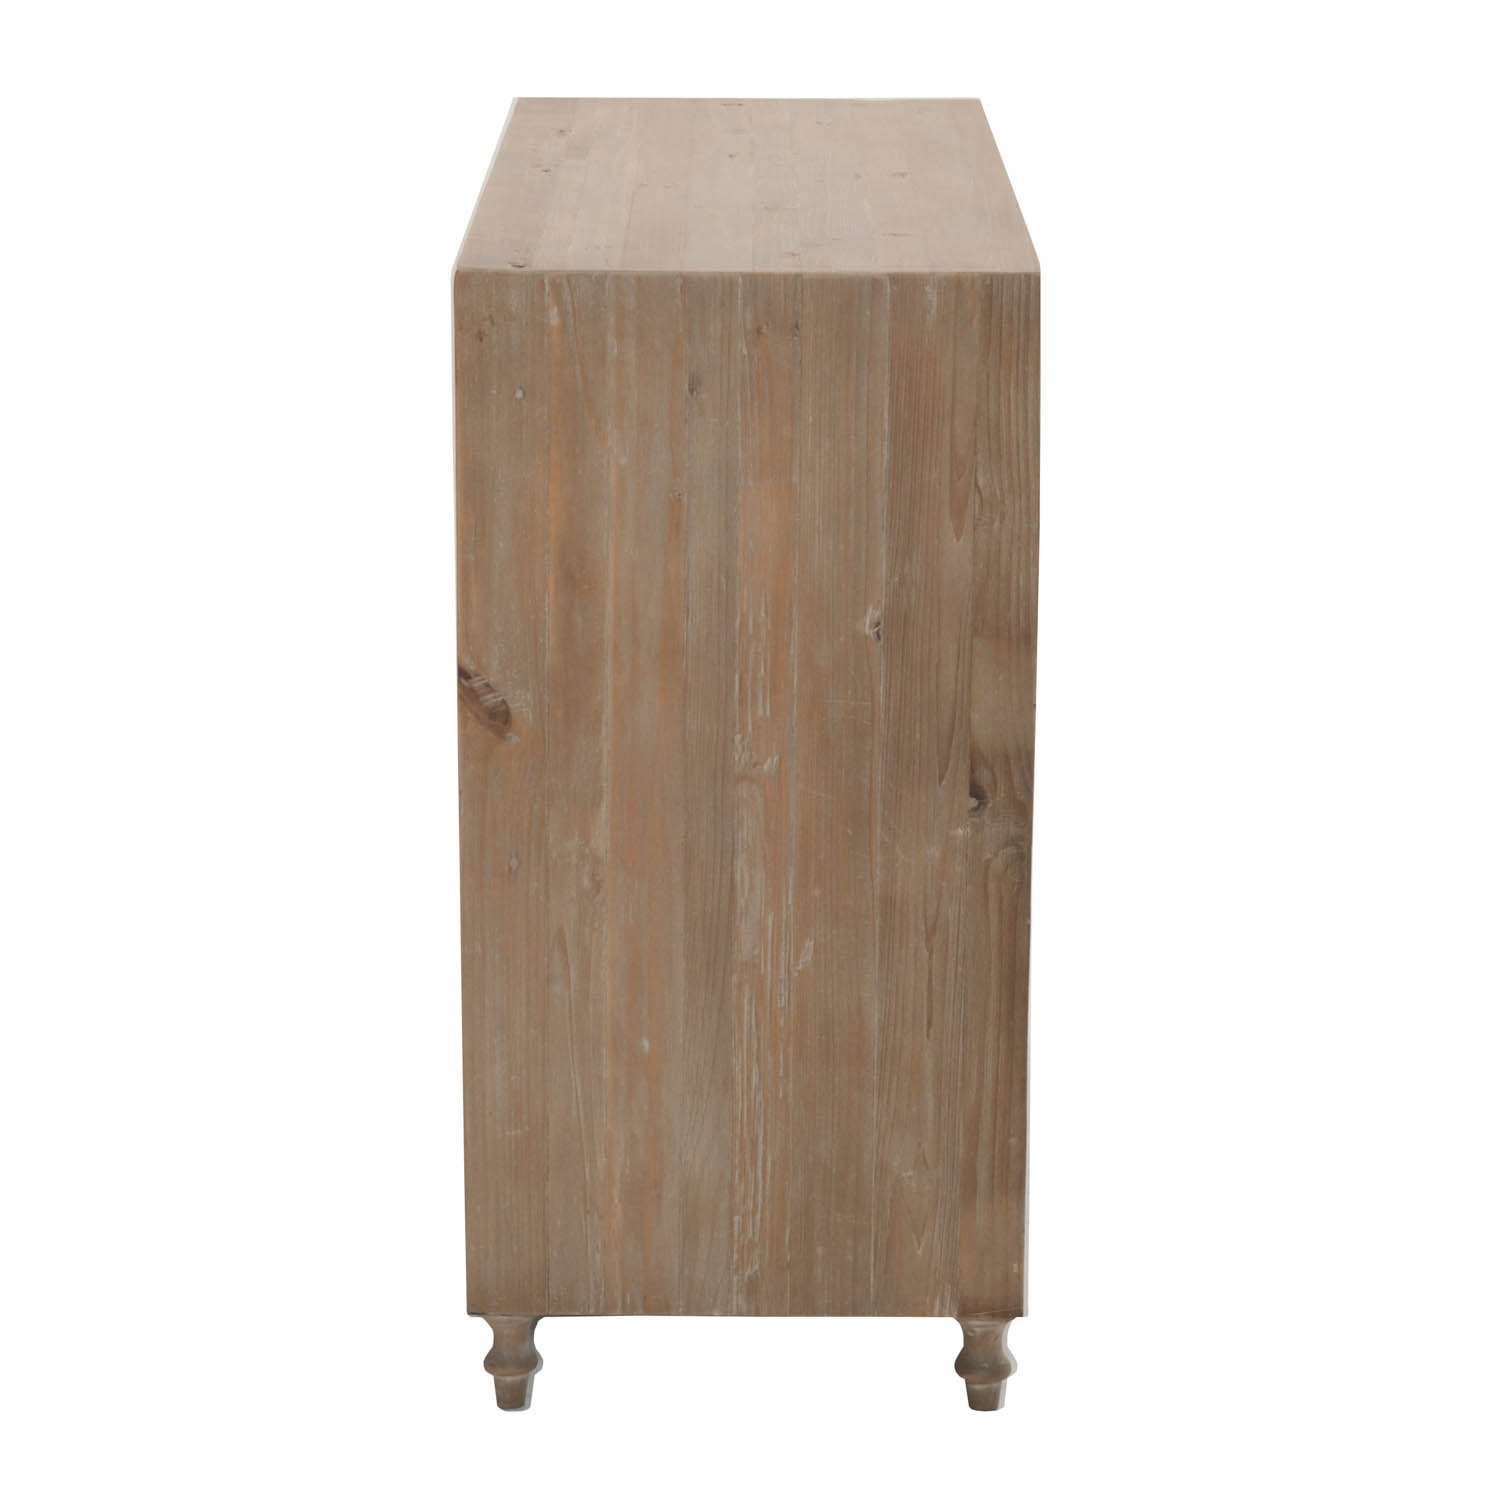 Clover Entry Cabinet, Smoke Gray - Image 4